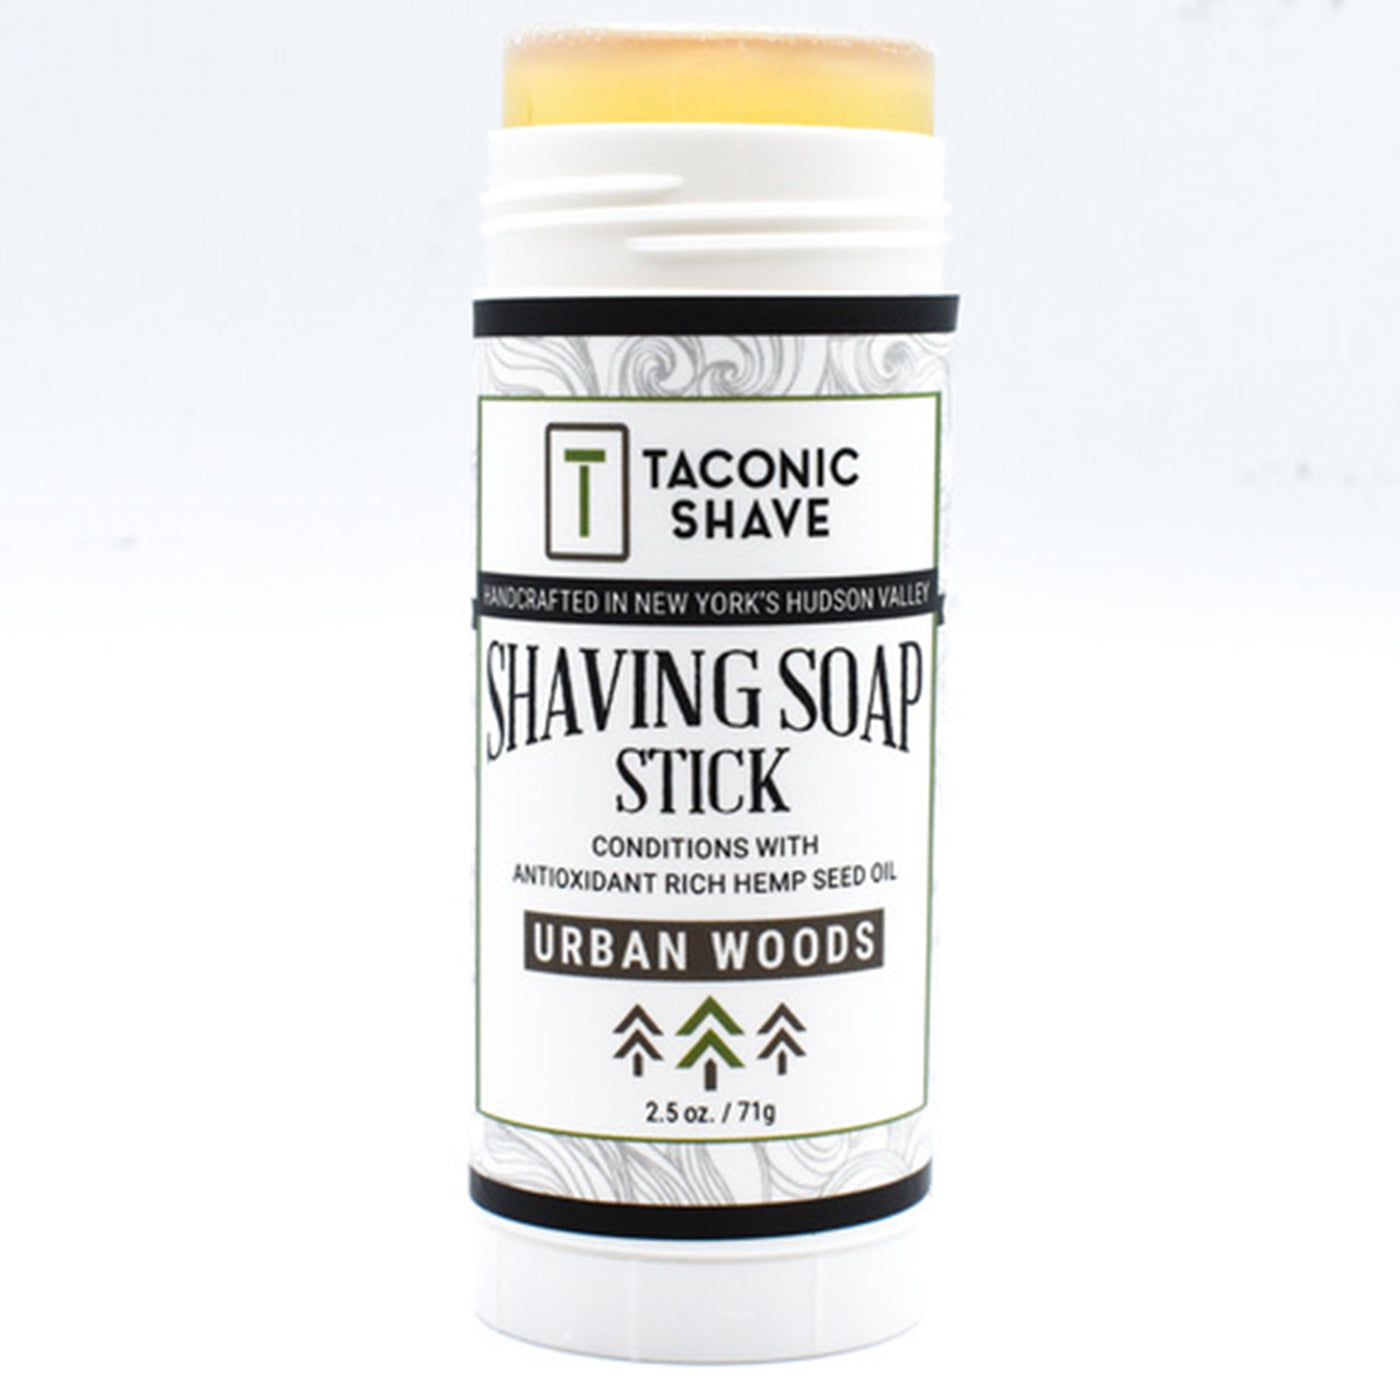  Taconic Shave Urban Woods Twist Up Shaving Soap Stick by Taconic Shave sold by Naked Armor Razors